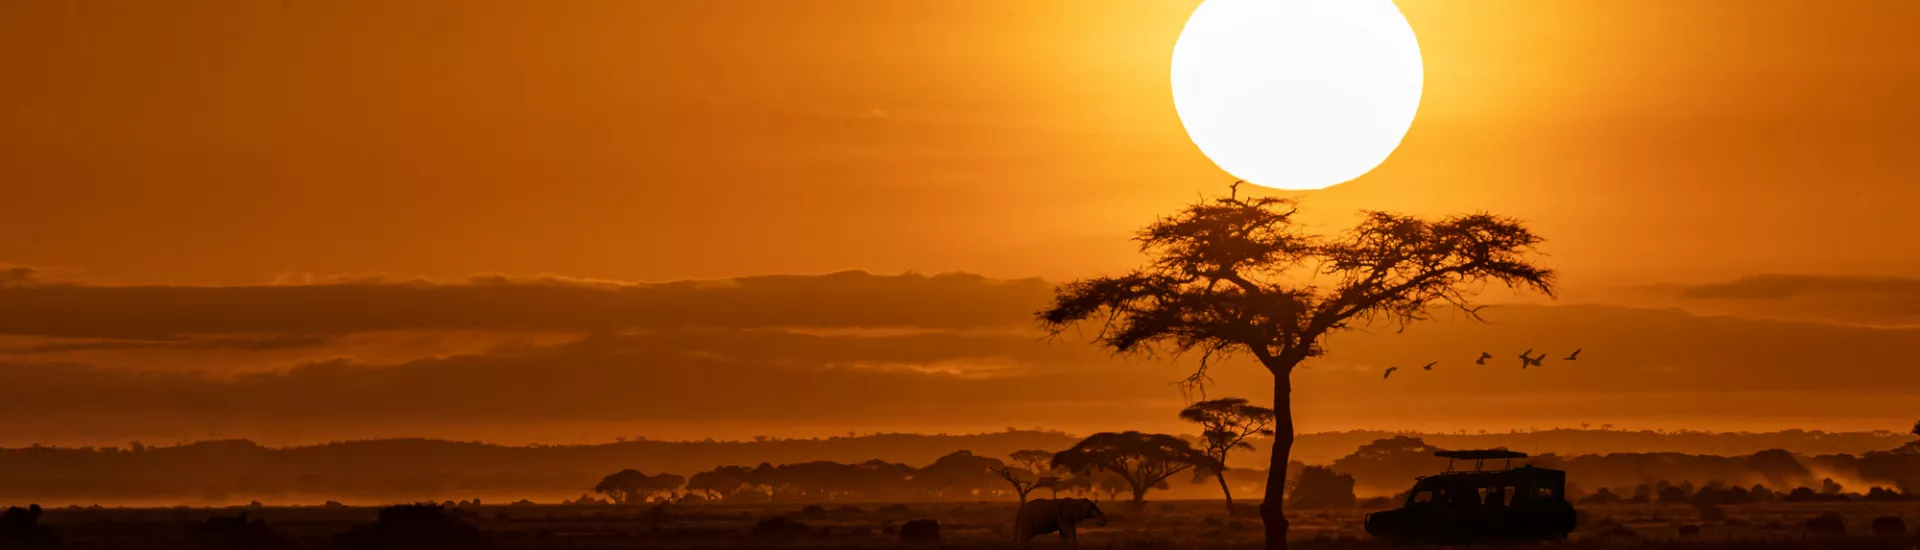 Sunset and trees in Africa